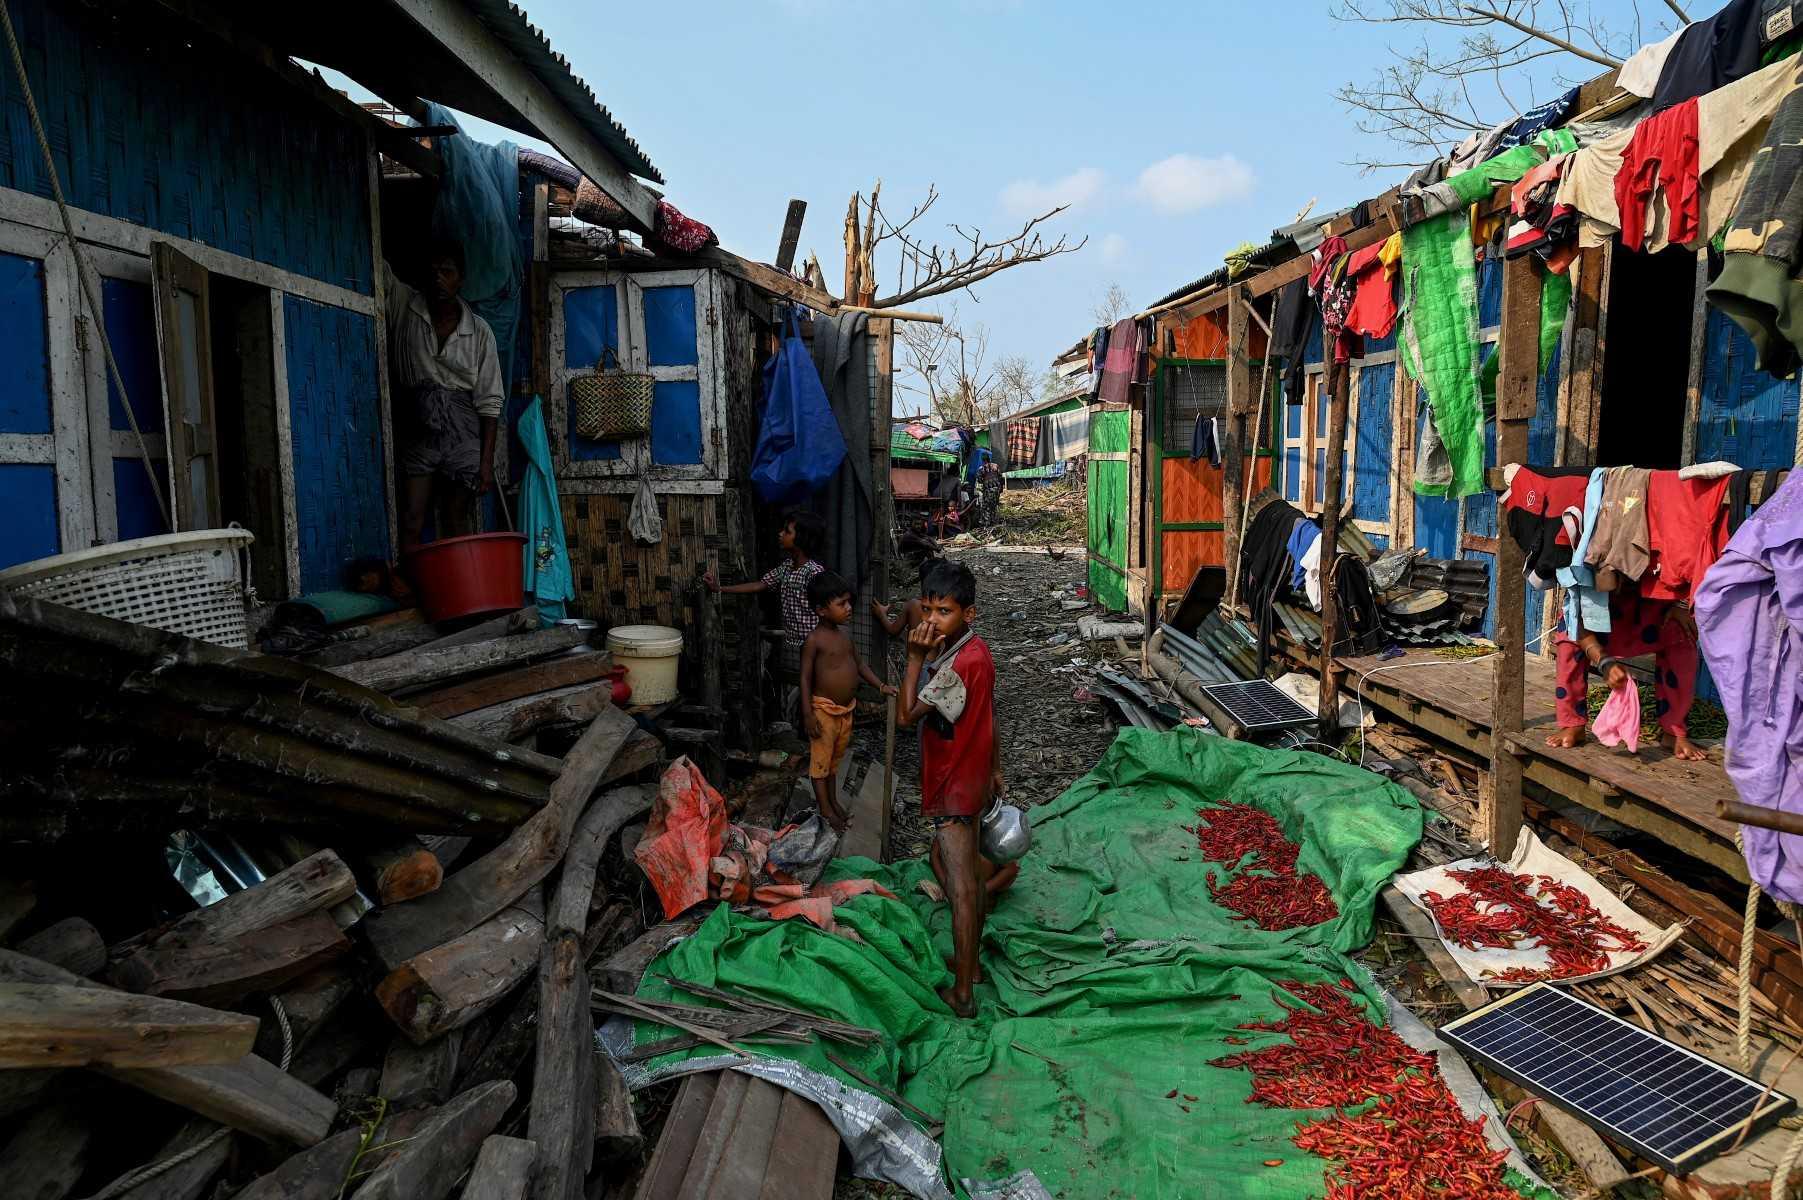 Rohingya children stand by destroyed houses at the Ohn Taw Chay refugee camp in Sittwe on May 16, in the aftermath of Cyclone Mocha's landfall. Photo: AFP